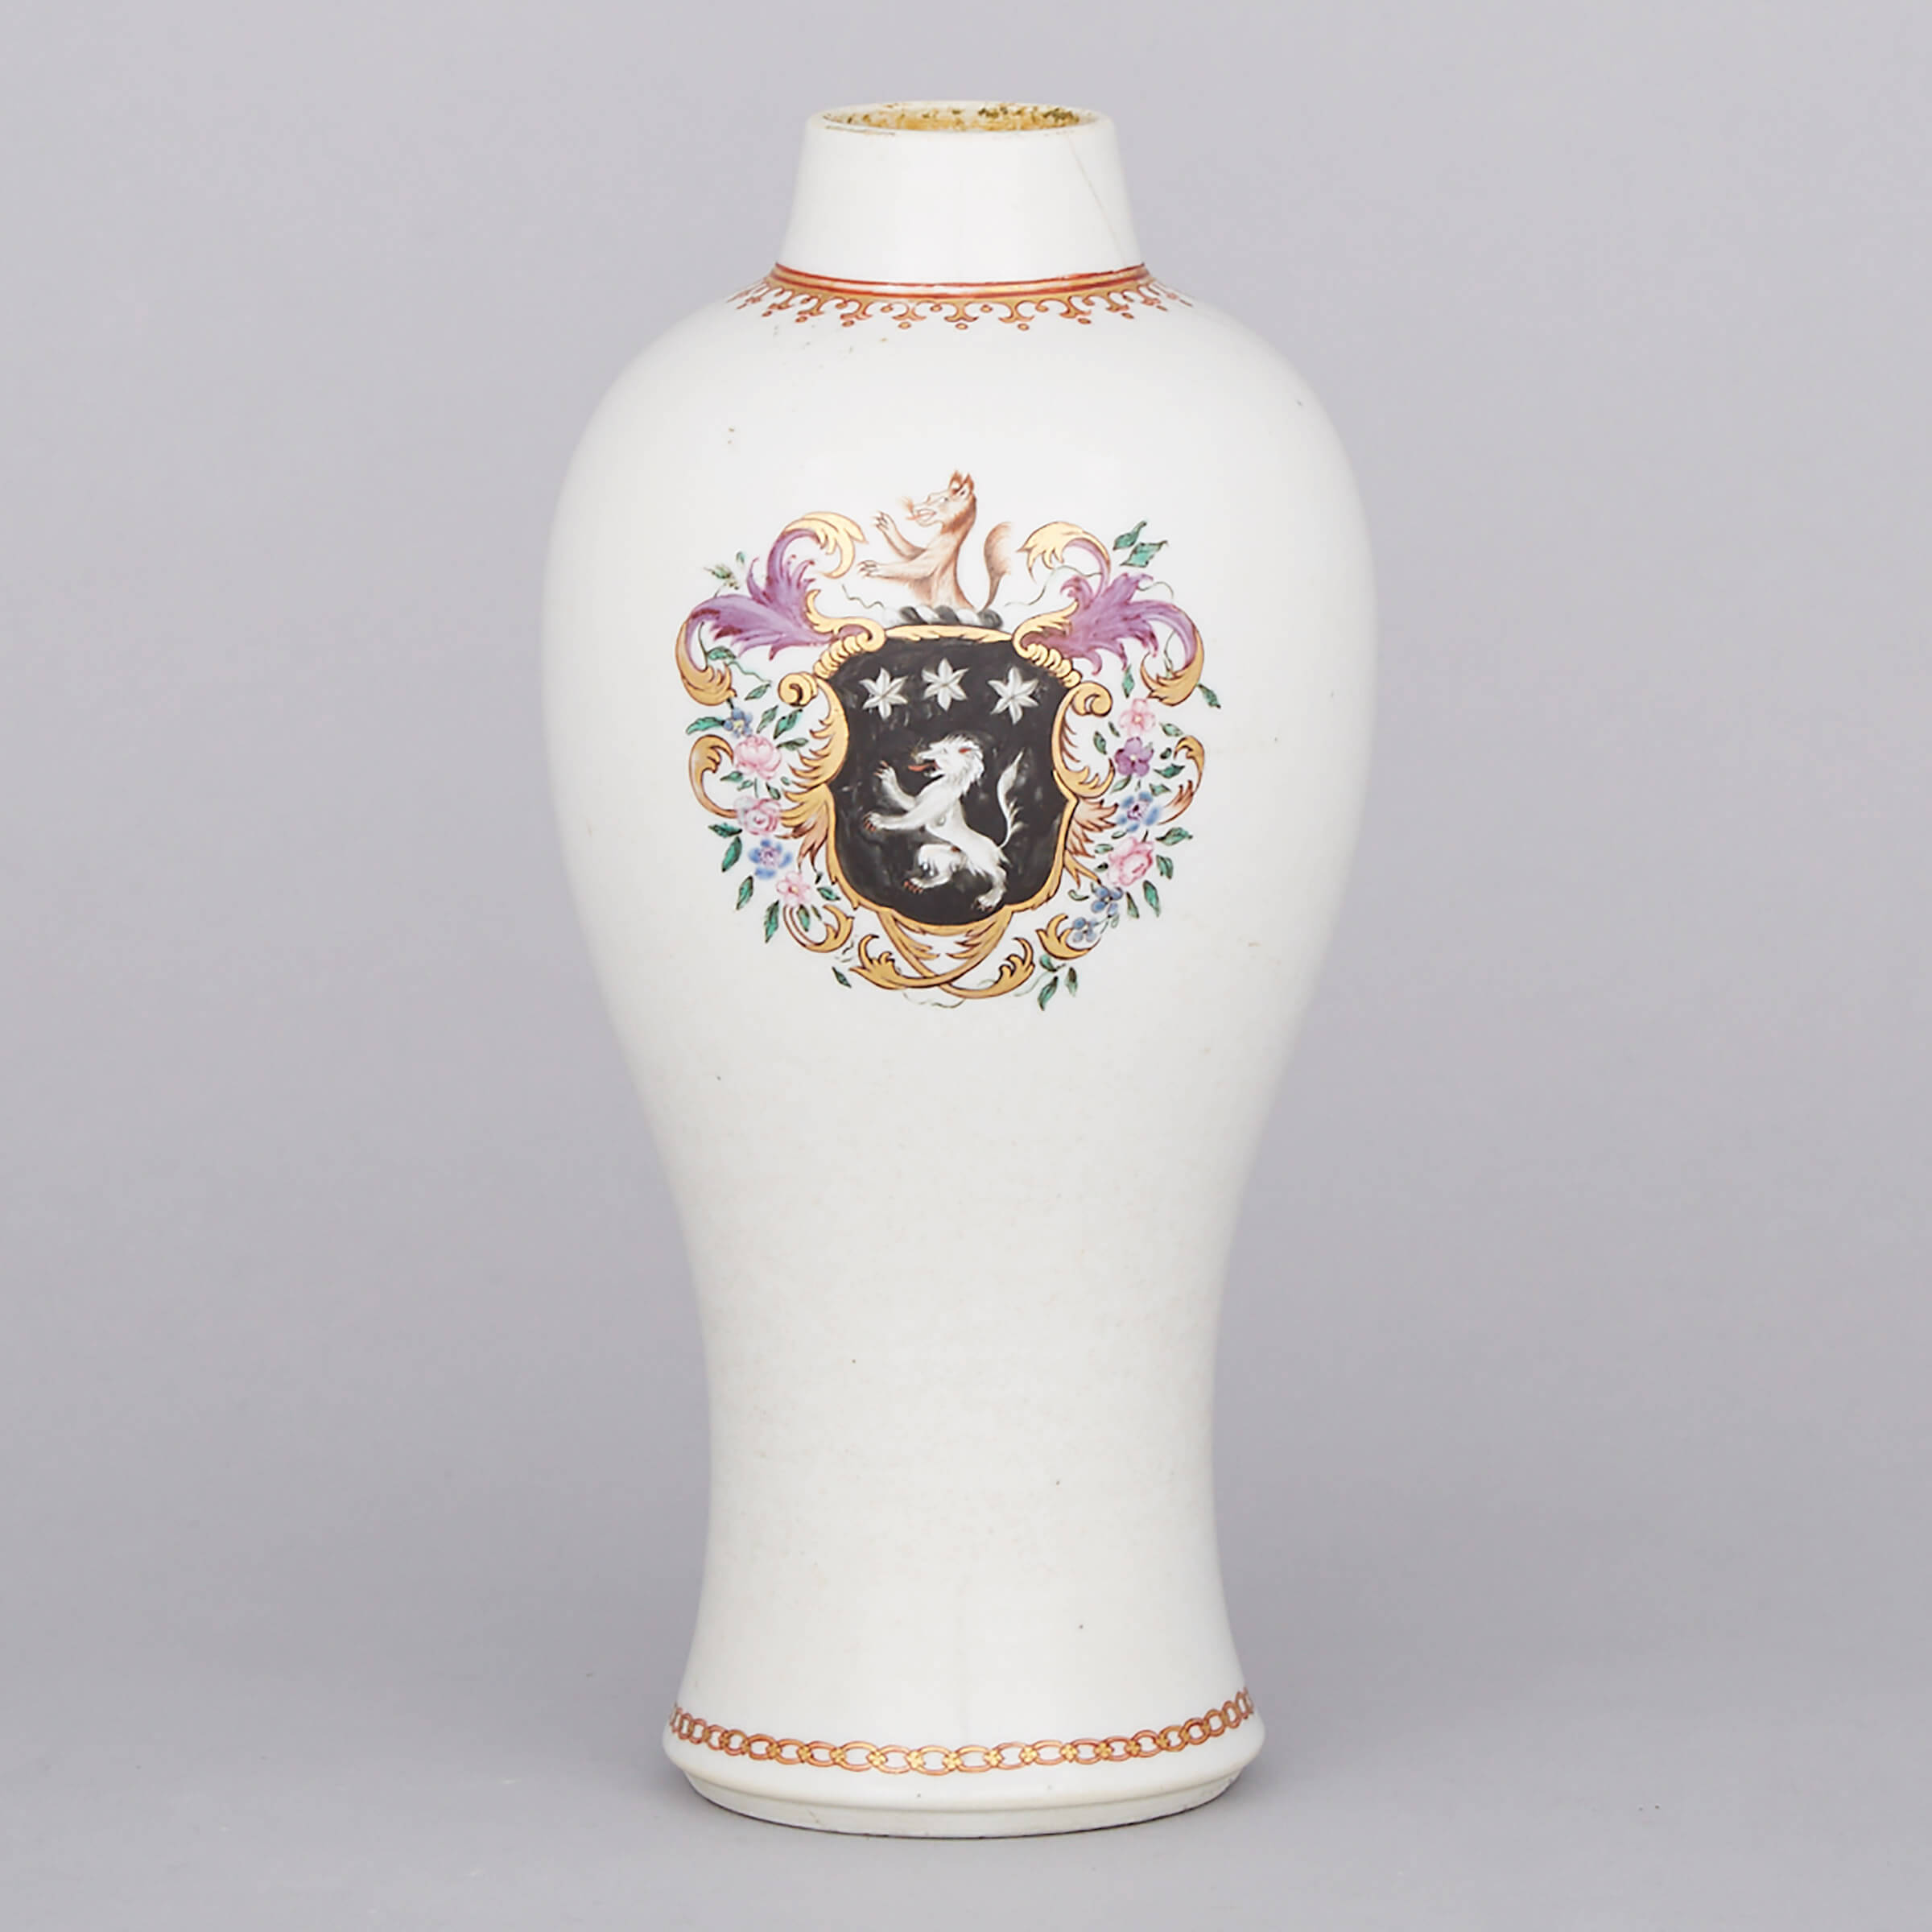 Chinese Export Style Armorial Vase, probably Samson, c.1900